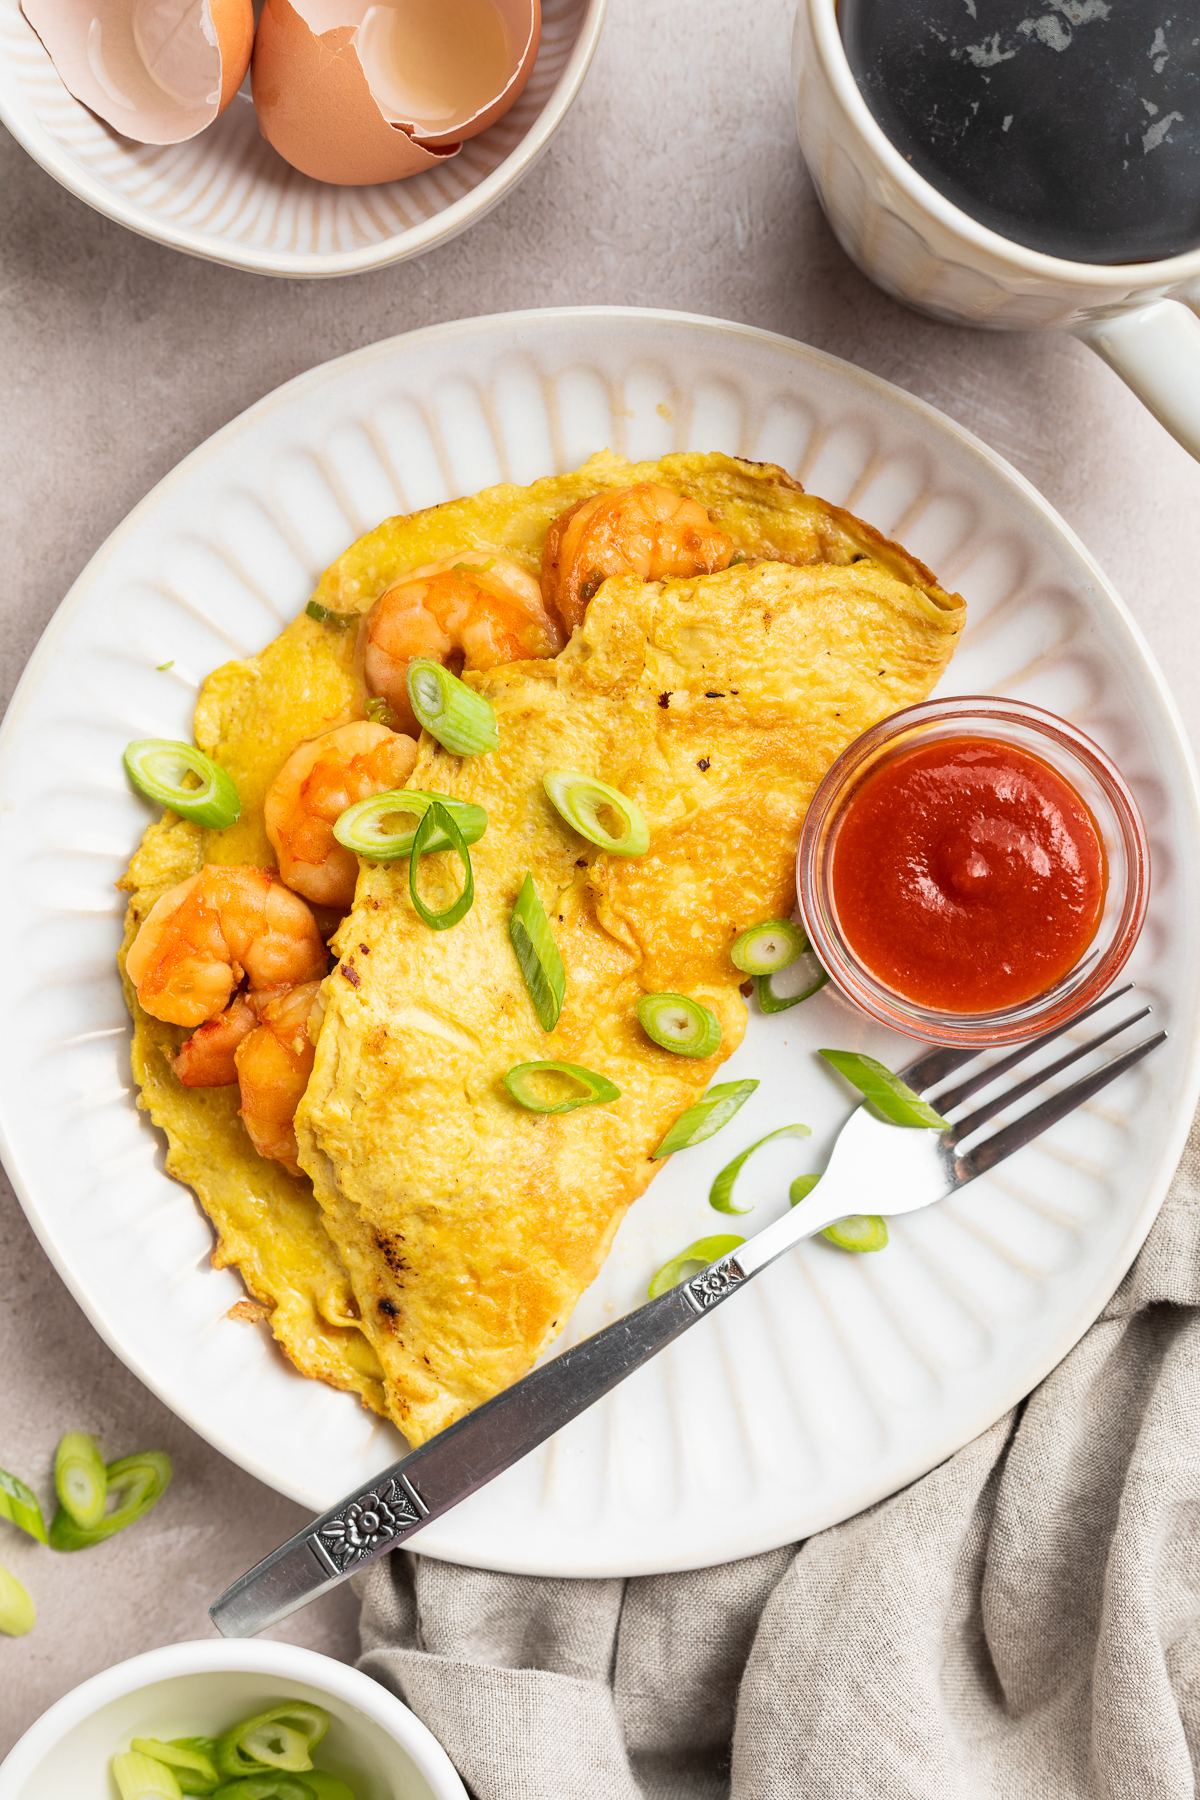 Overhead view of a folded, half-moon shaped shrimp omelette topped with chopped green onions on a white plate with small bowl of ketchup.